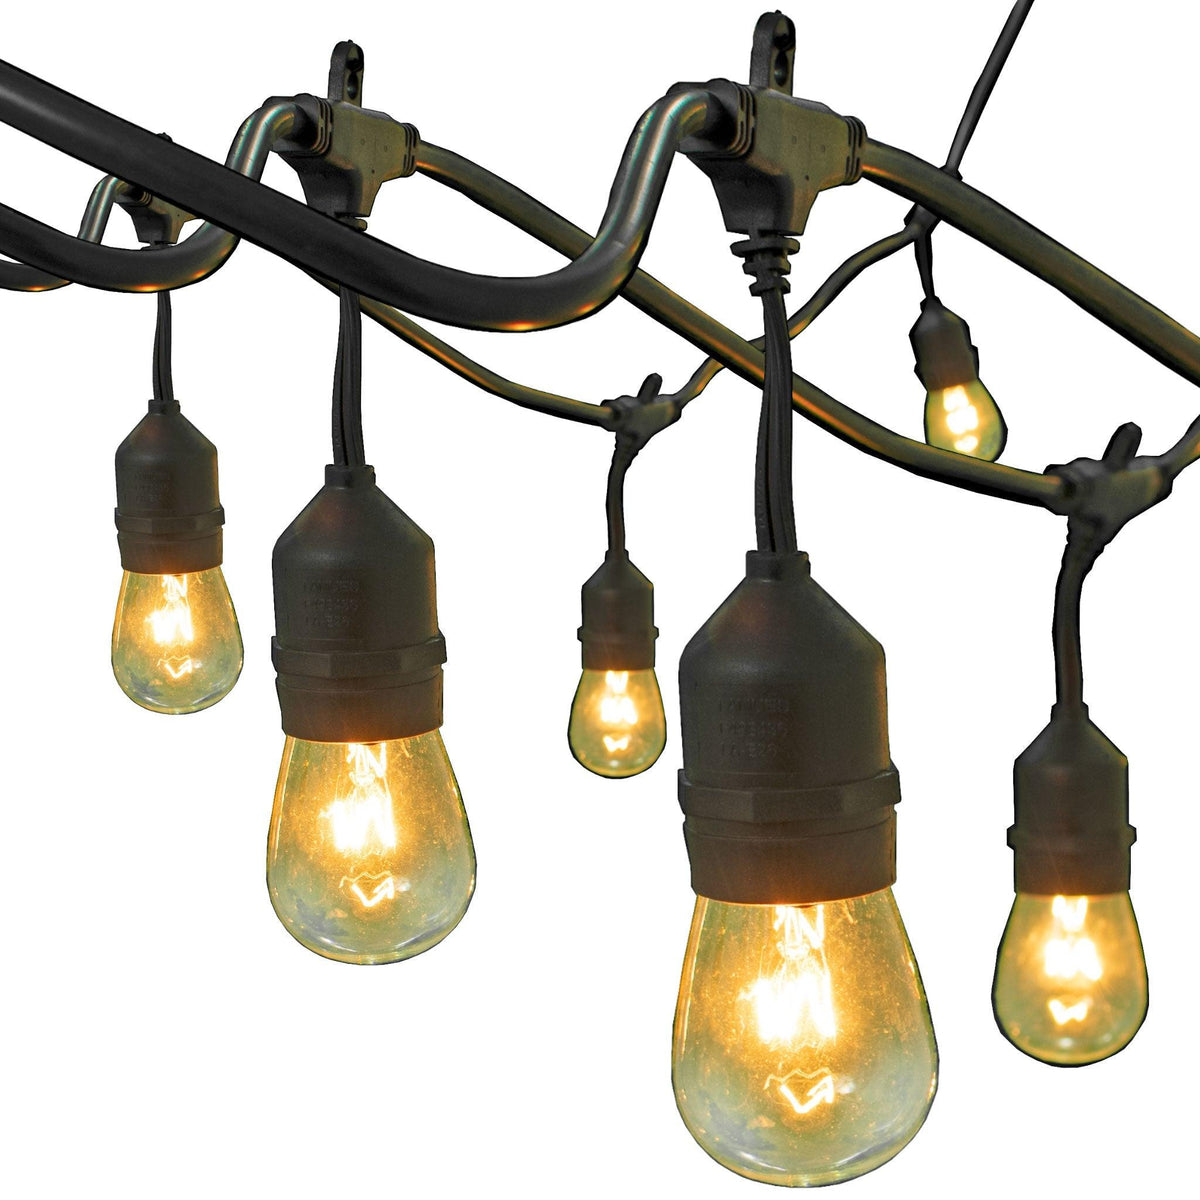 Outdoor Hanging String Lights with S14 Incandescent Edison Light Bulbs sold in sets with the bulbs included at leedisplay.com